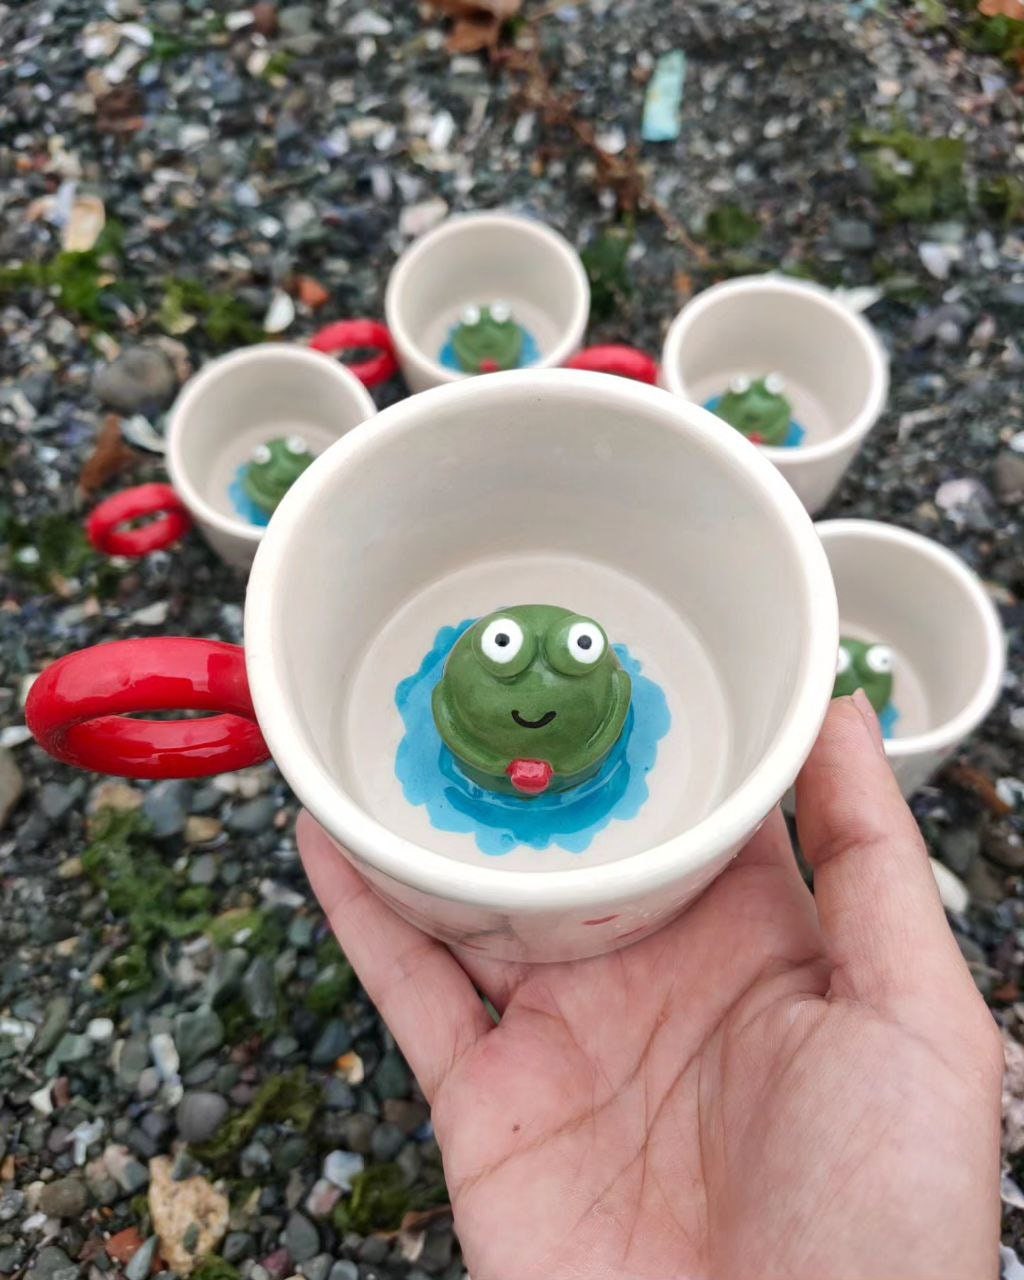 Frog Coffee Mugs Animal Inside Cups 12 Oz Funny Coffee Mugs with Handle  Cute Coffee Mugs Tea Cups with Spoon Kids Mugs Ceramic Novelty Cups  Birthday Gift for Women Friends Unique Coffee